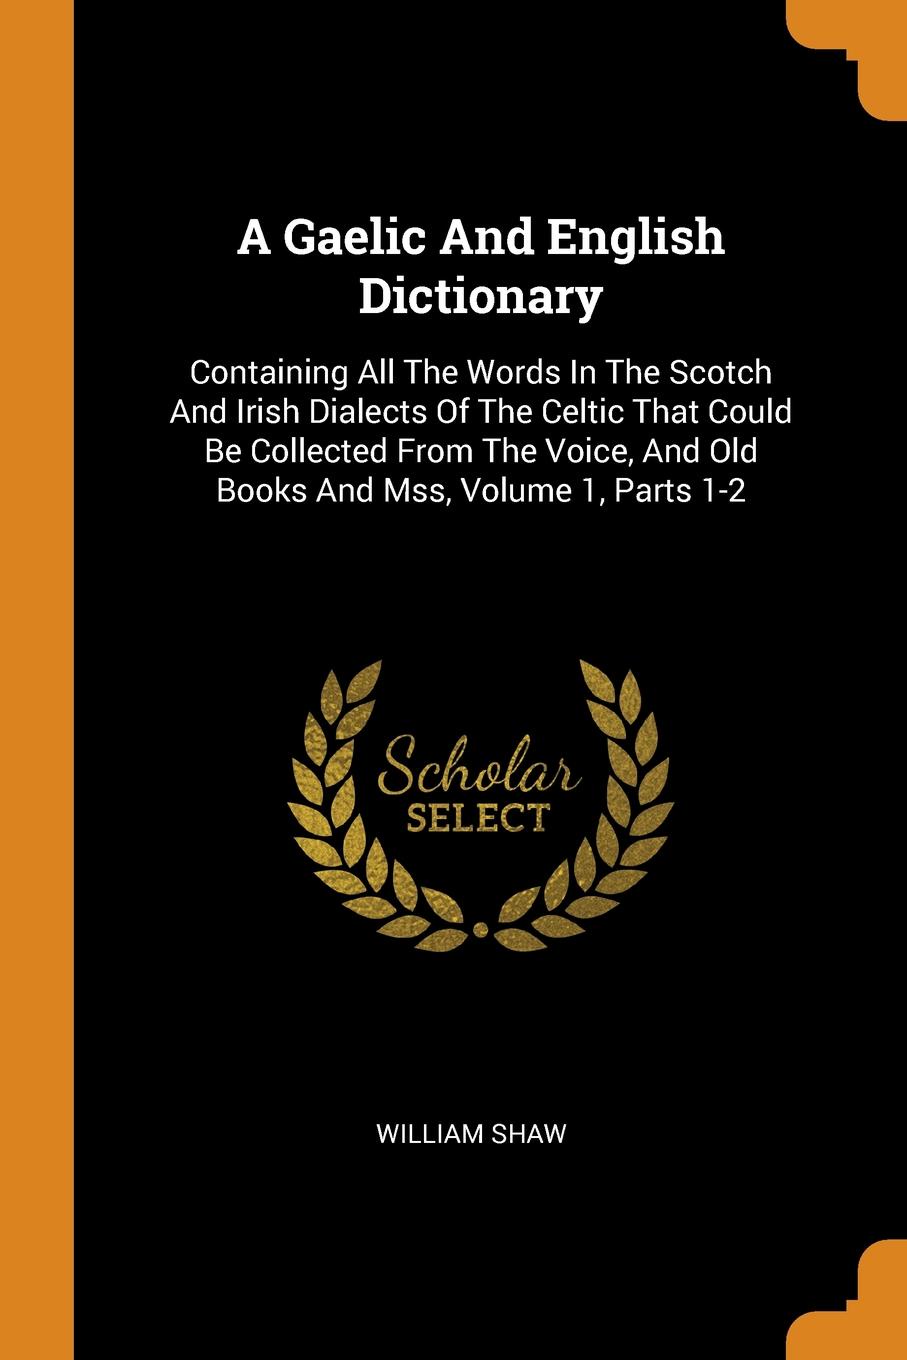 A Gaelic And English Dictionary. Containing All The Words In The Scotch And Irish Dialects Of The Celtic That Could Be Collected From The Voice, And Old Books And Mss, Volume 1, Parts 1-2